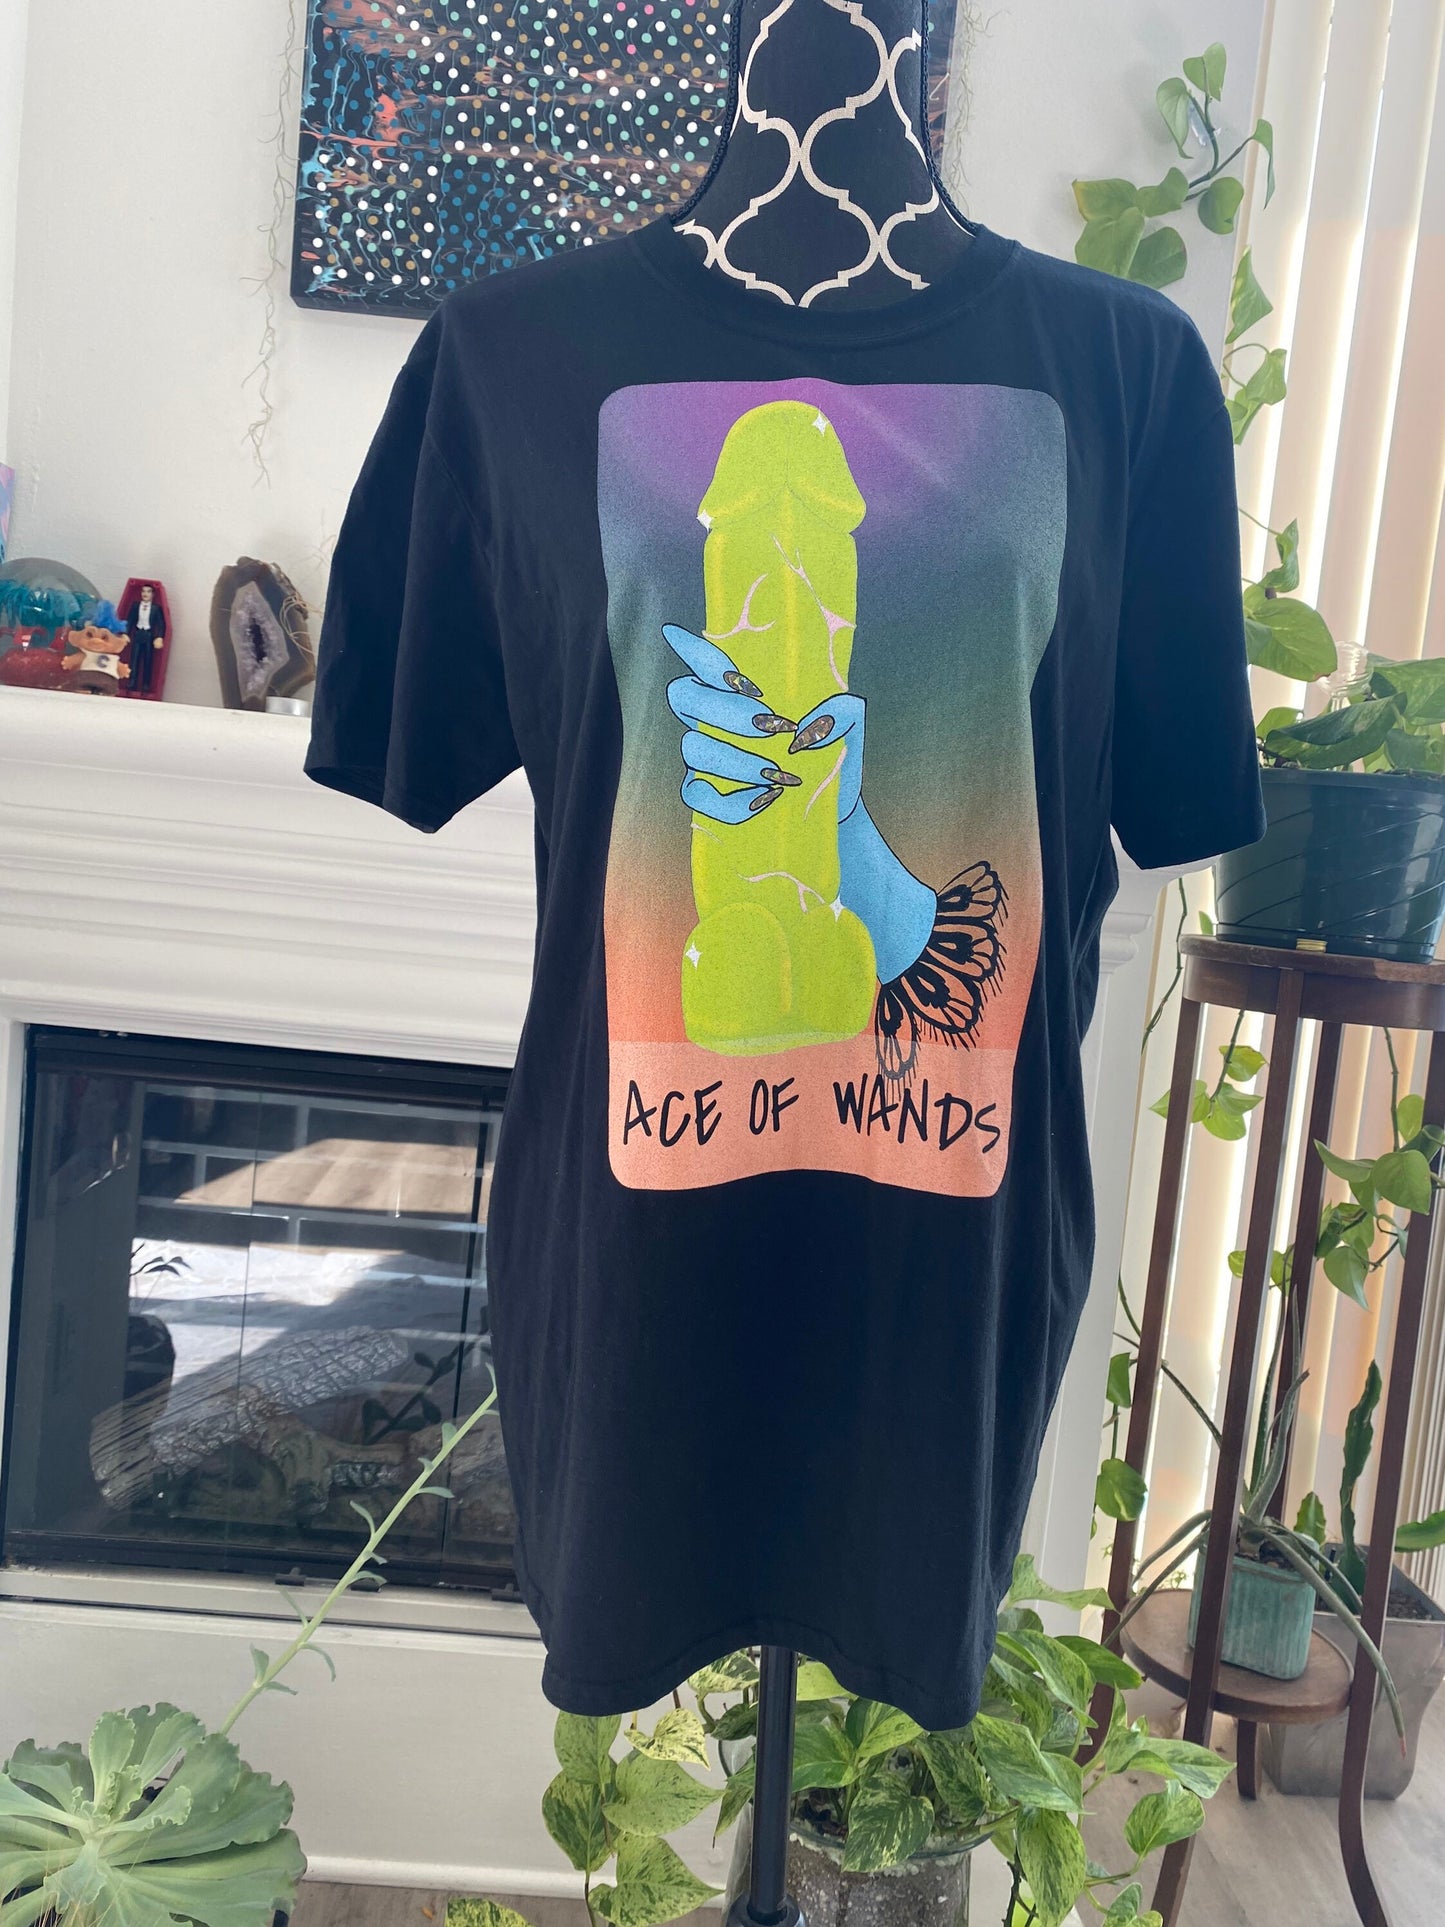 Ace of Wands Tee - Available in sizes S-3XL